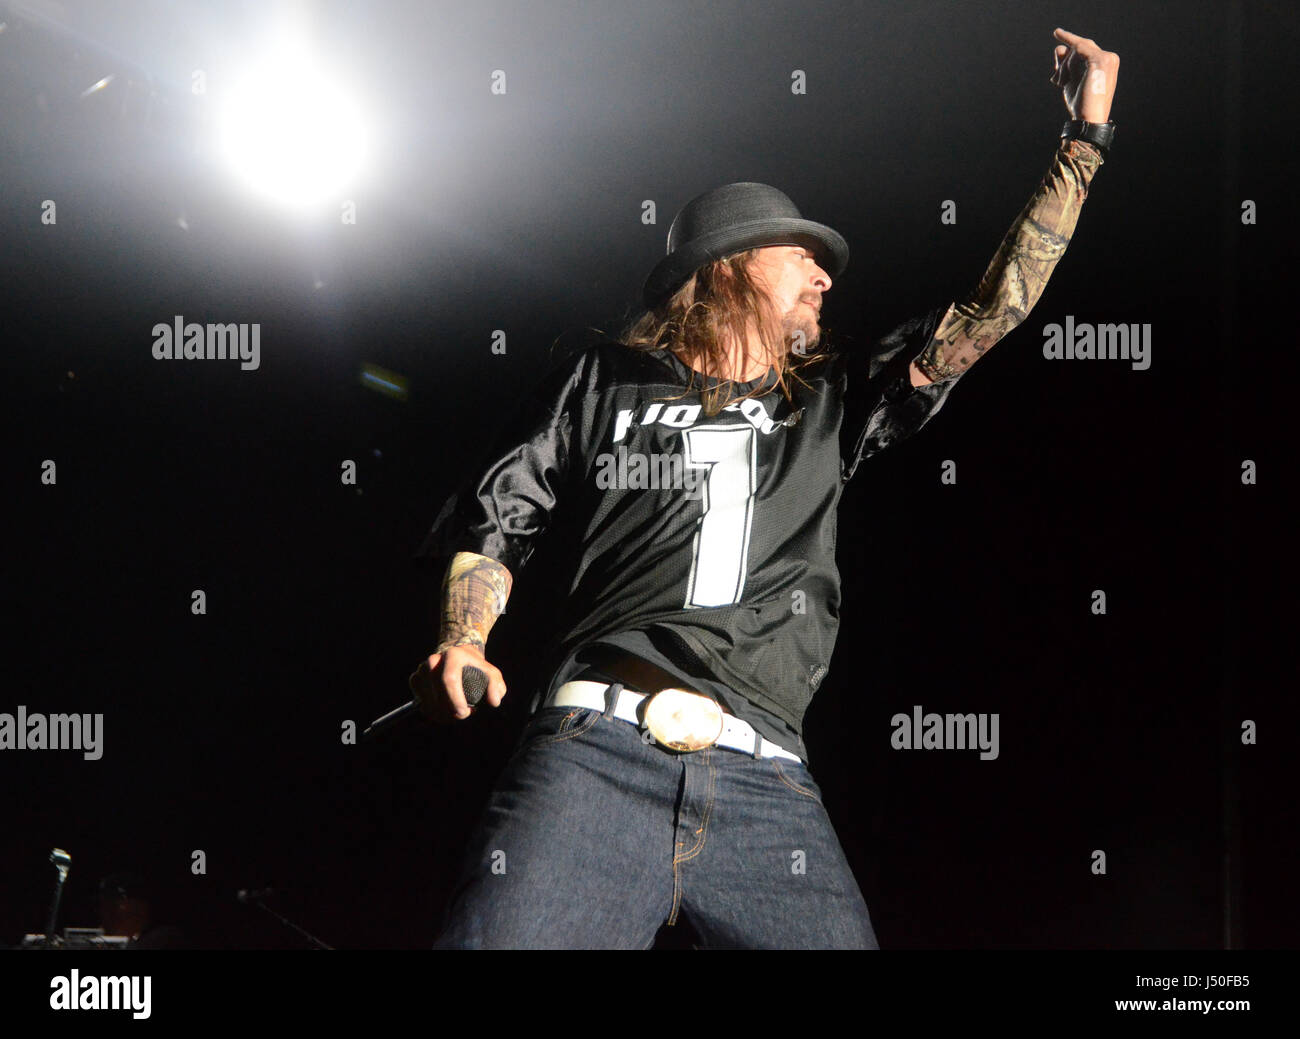 Somerset, Wisconsin, USA. 14th May, 2017. Singer and songwriter Kid Rock performs during the Northern Invasion Music Festival in Somerset, Wisconsin. Ricky Bassman/Cal Sport Media/Alamy Live News Stock Photo